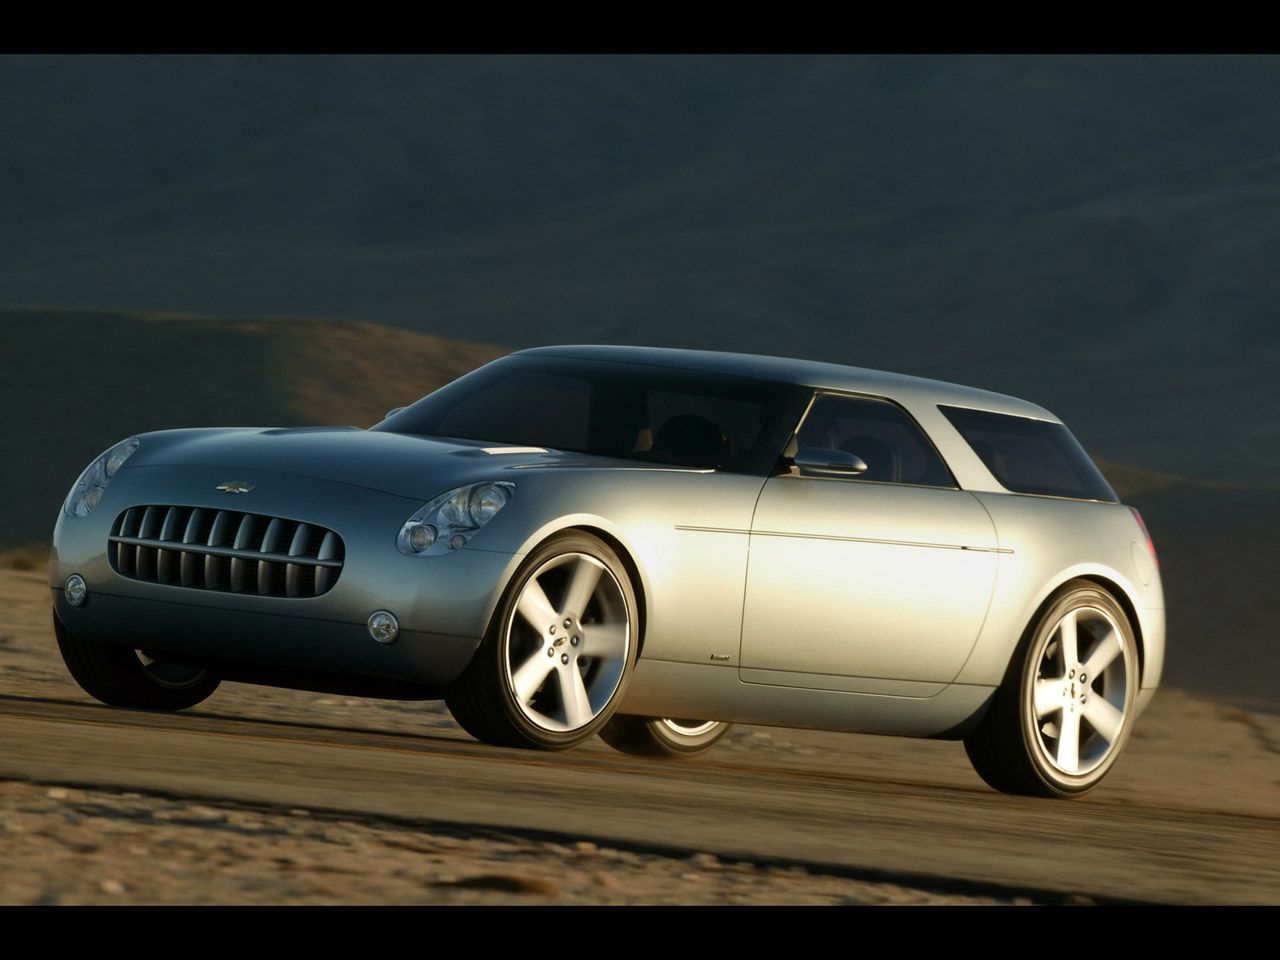 The 2004 Chevy Nomad Concept car.